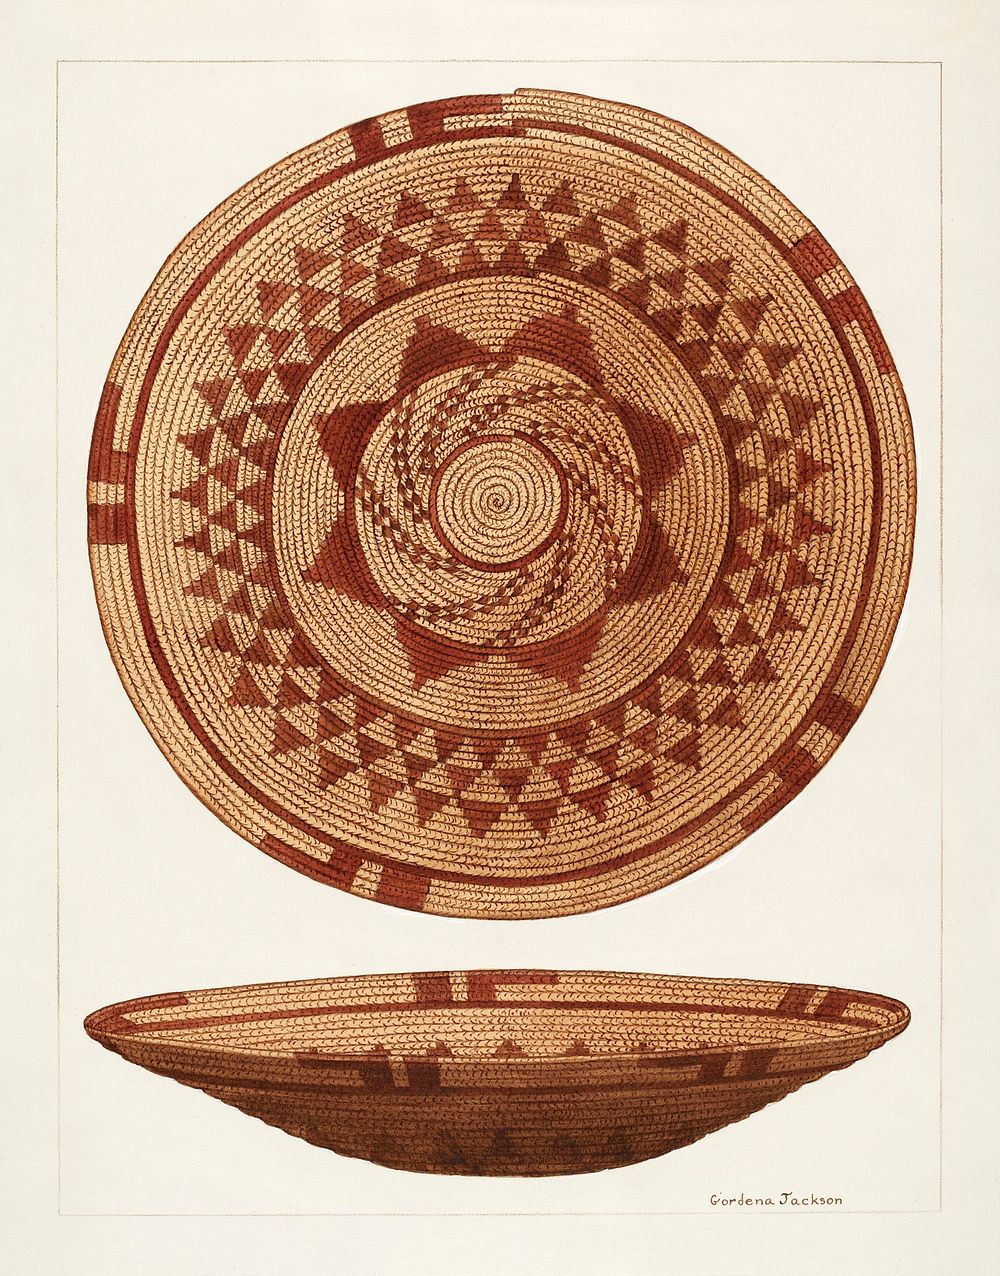 Basket (ca. 1937) by Gordena Jackson. Original from The National Gallery of Art. Digitally enhanced by rawpixel.